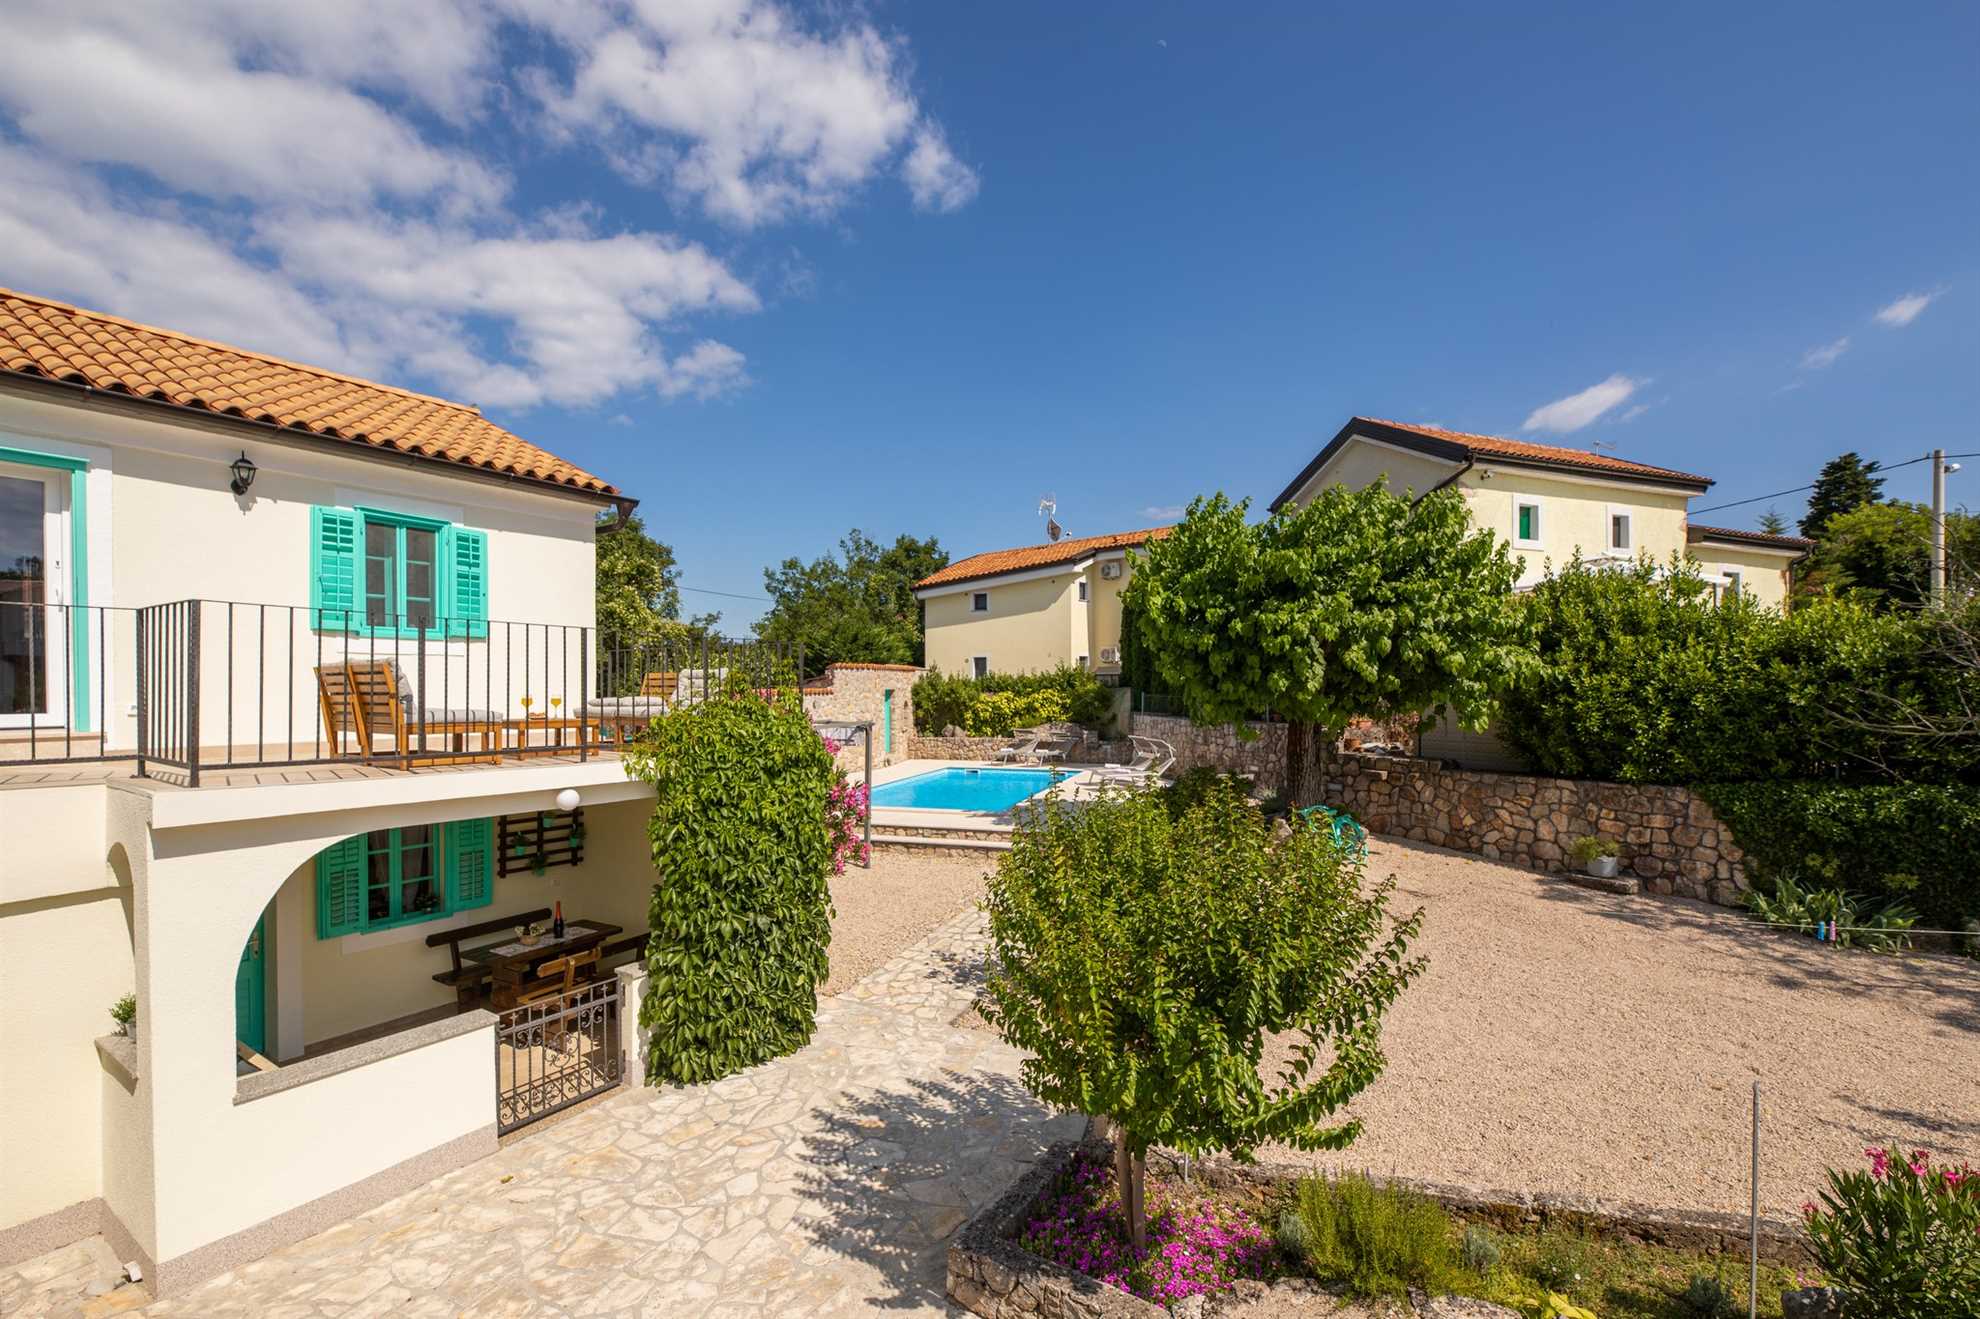 Charming holiday house Antica with private swimming pool